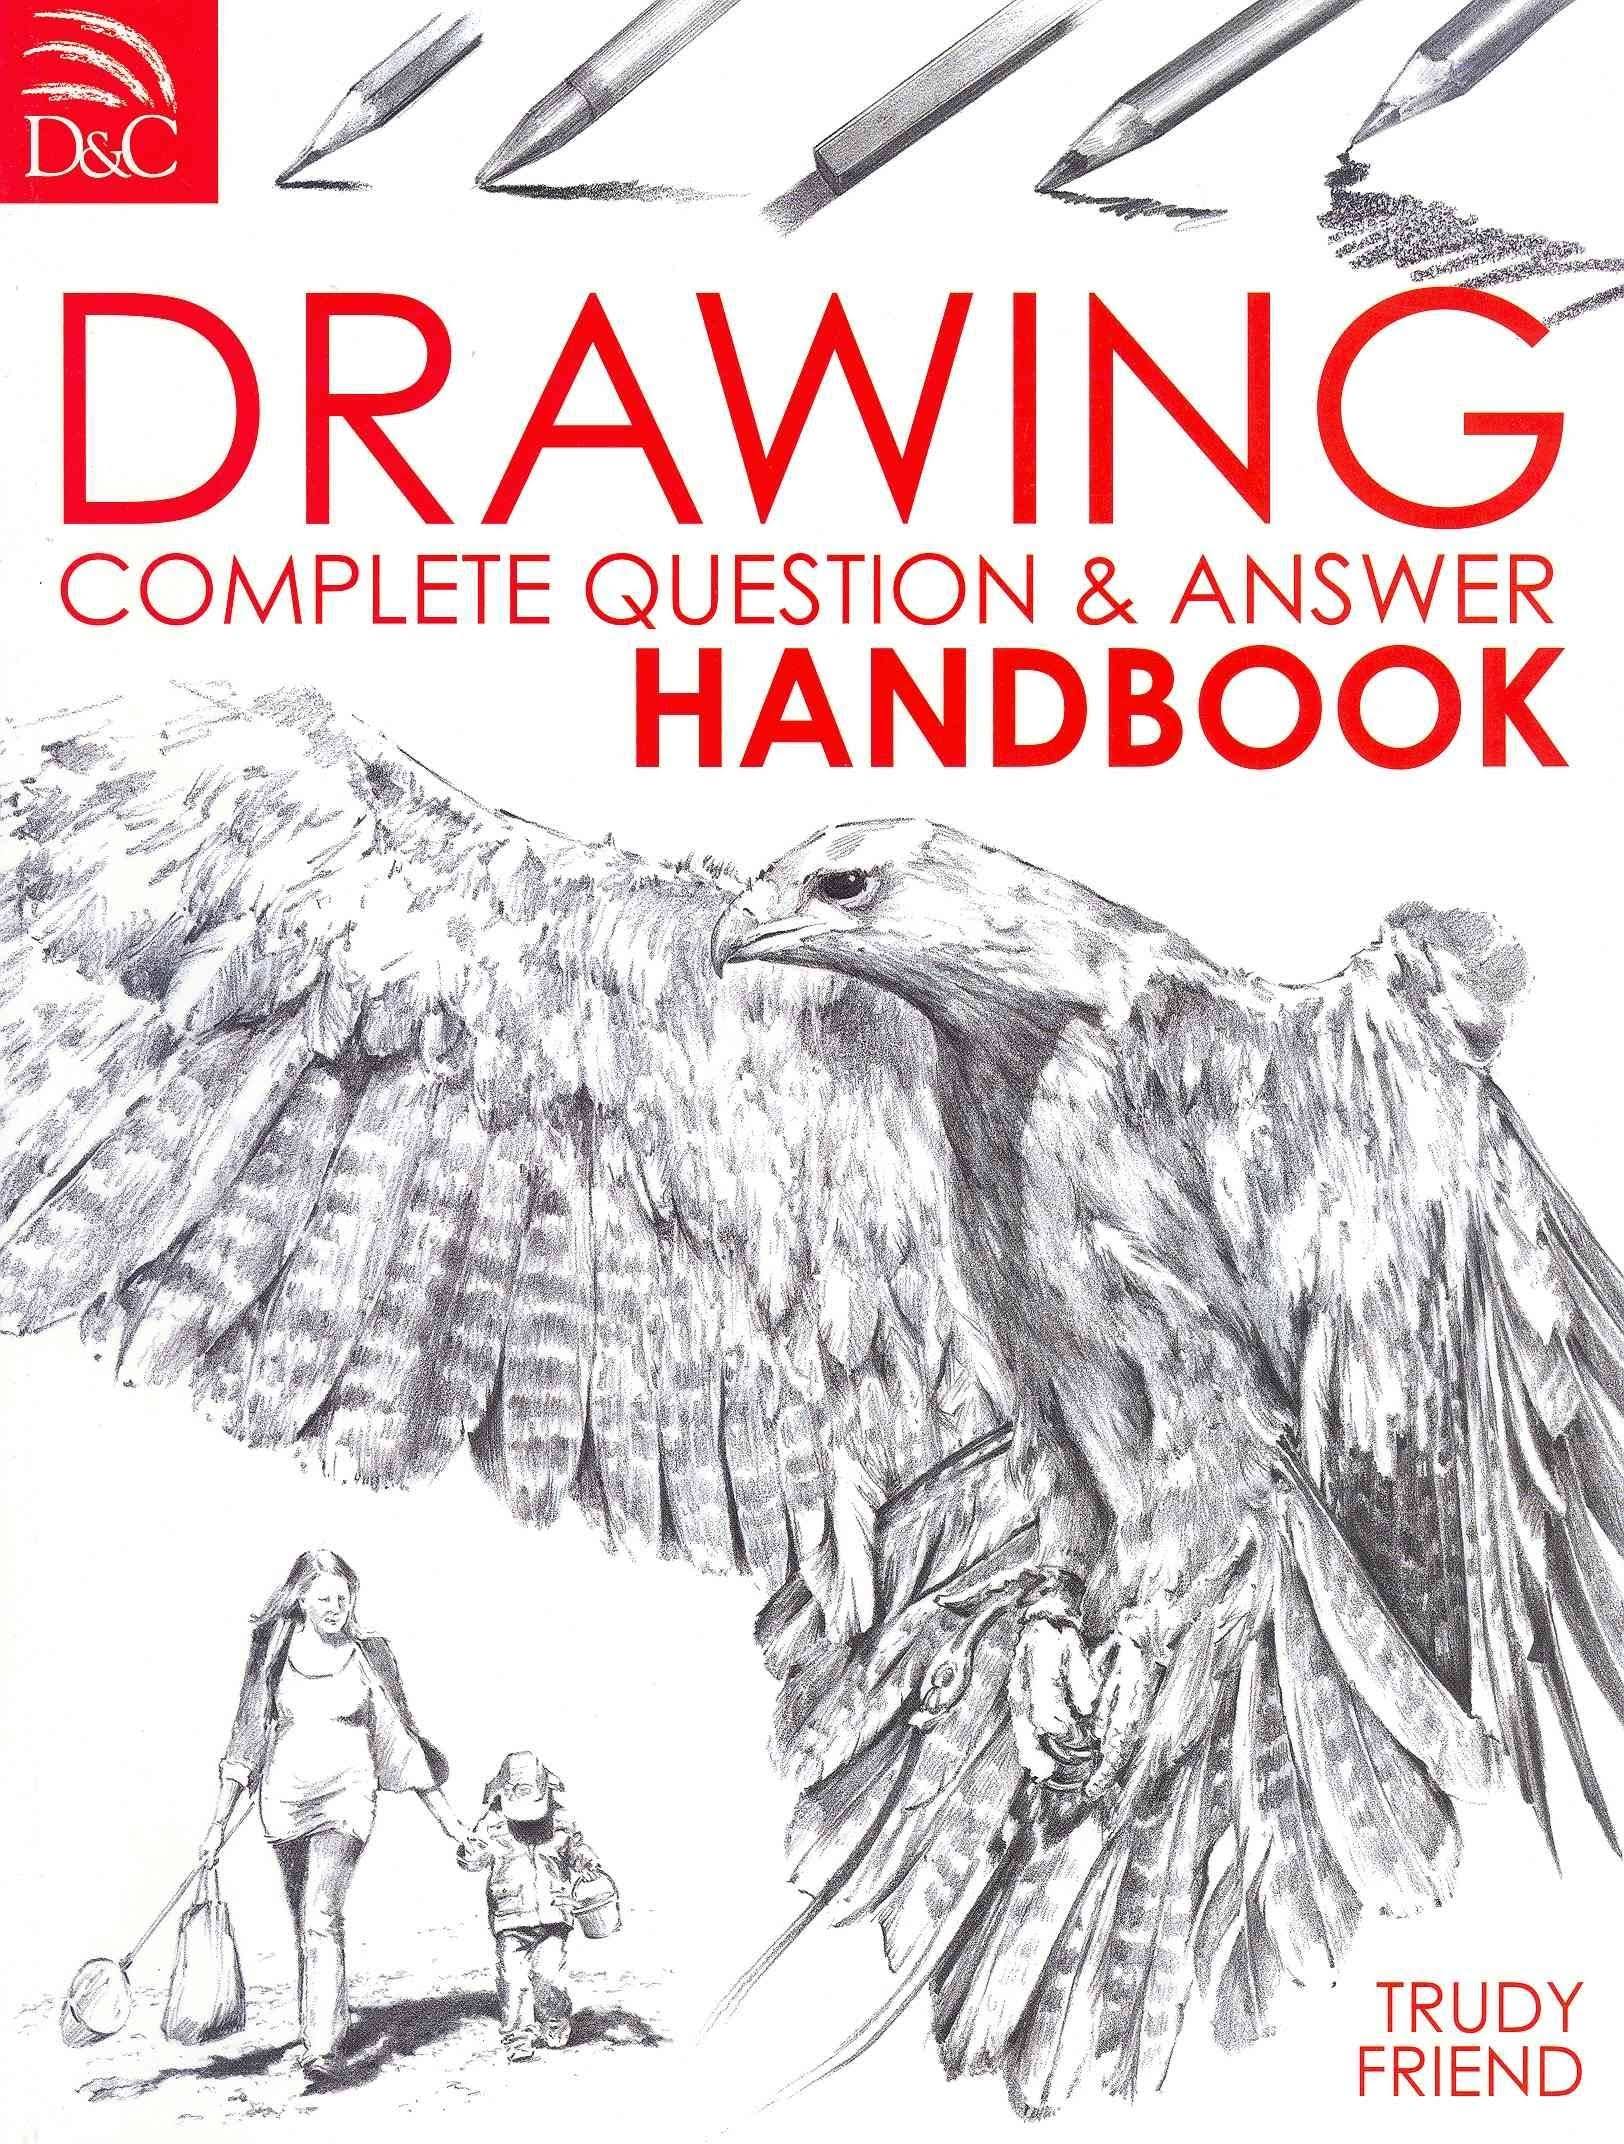 Drawing: Complete Question and Answer Handbook by Trudy Friend